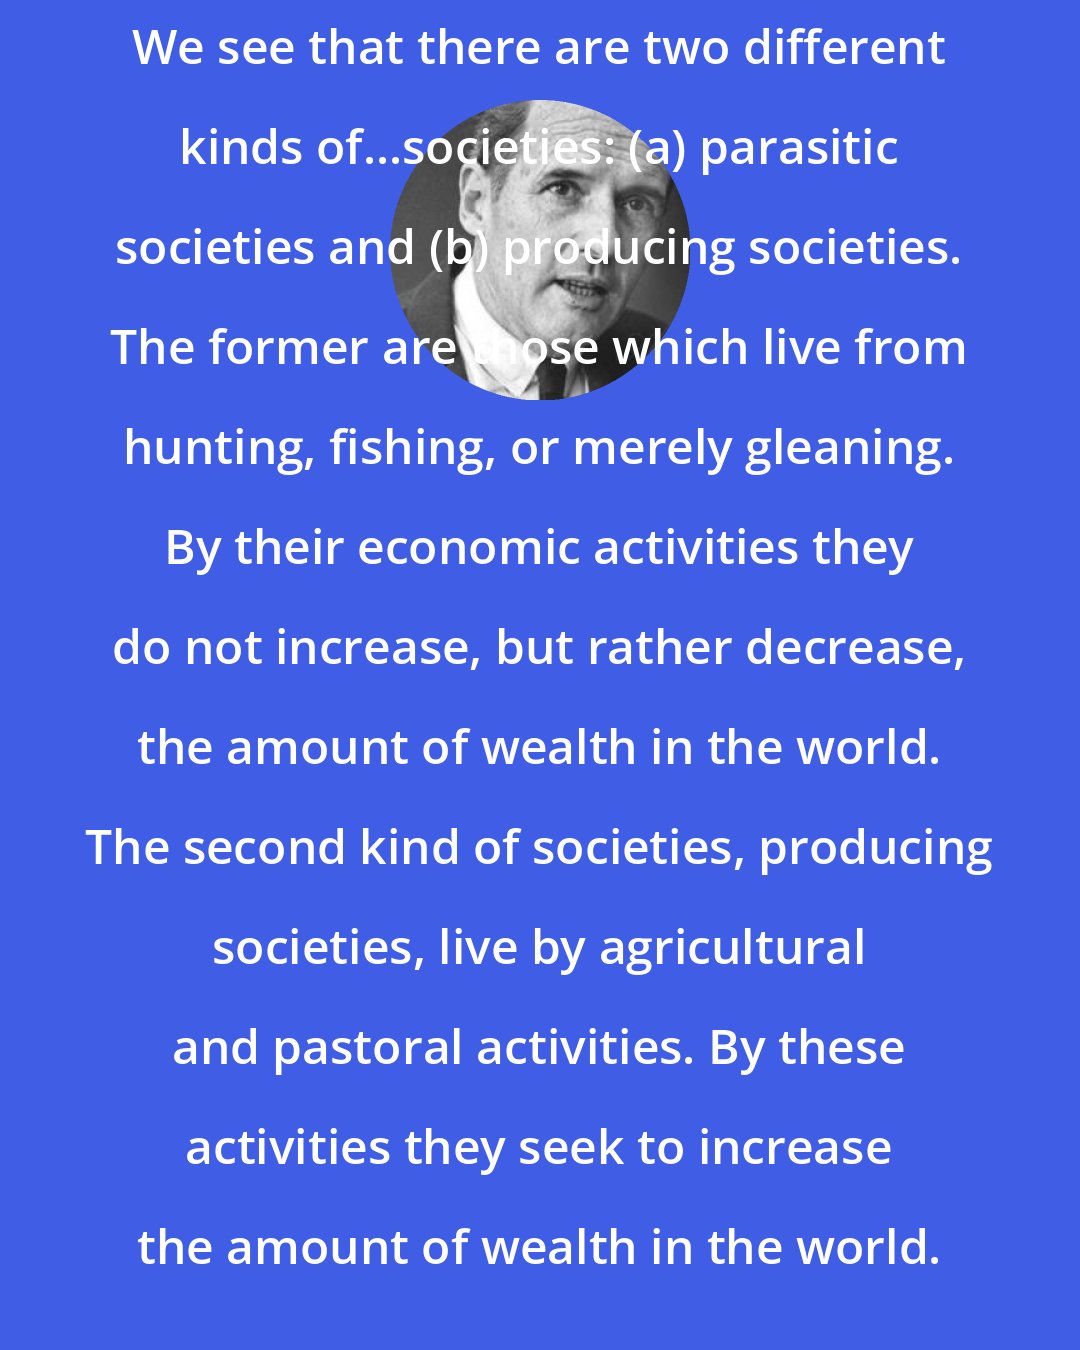 Carroll Quigley: We see that there are two different kinds of...societies: (a) parasitic societies and (b) producing societies. The former are those which live from hunting, fishing, or merely gleaning. By their economic activities they do not increase, but rather decrease, the amount of wealth in the world. The second kind of societies, producing societies, live by agricultural and pastoral activities. By these activities they seek to increase the amount of wealth in the world.